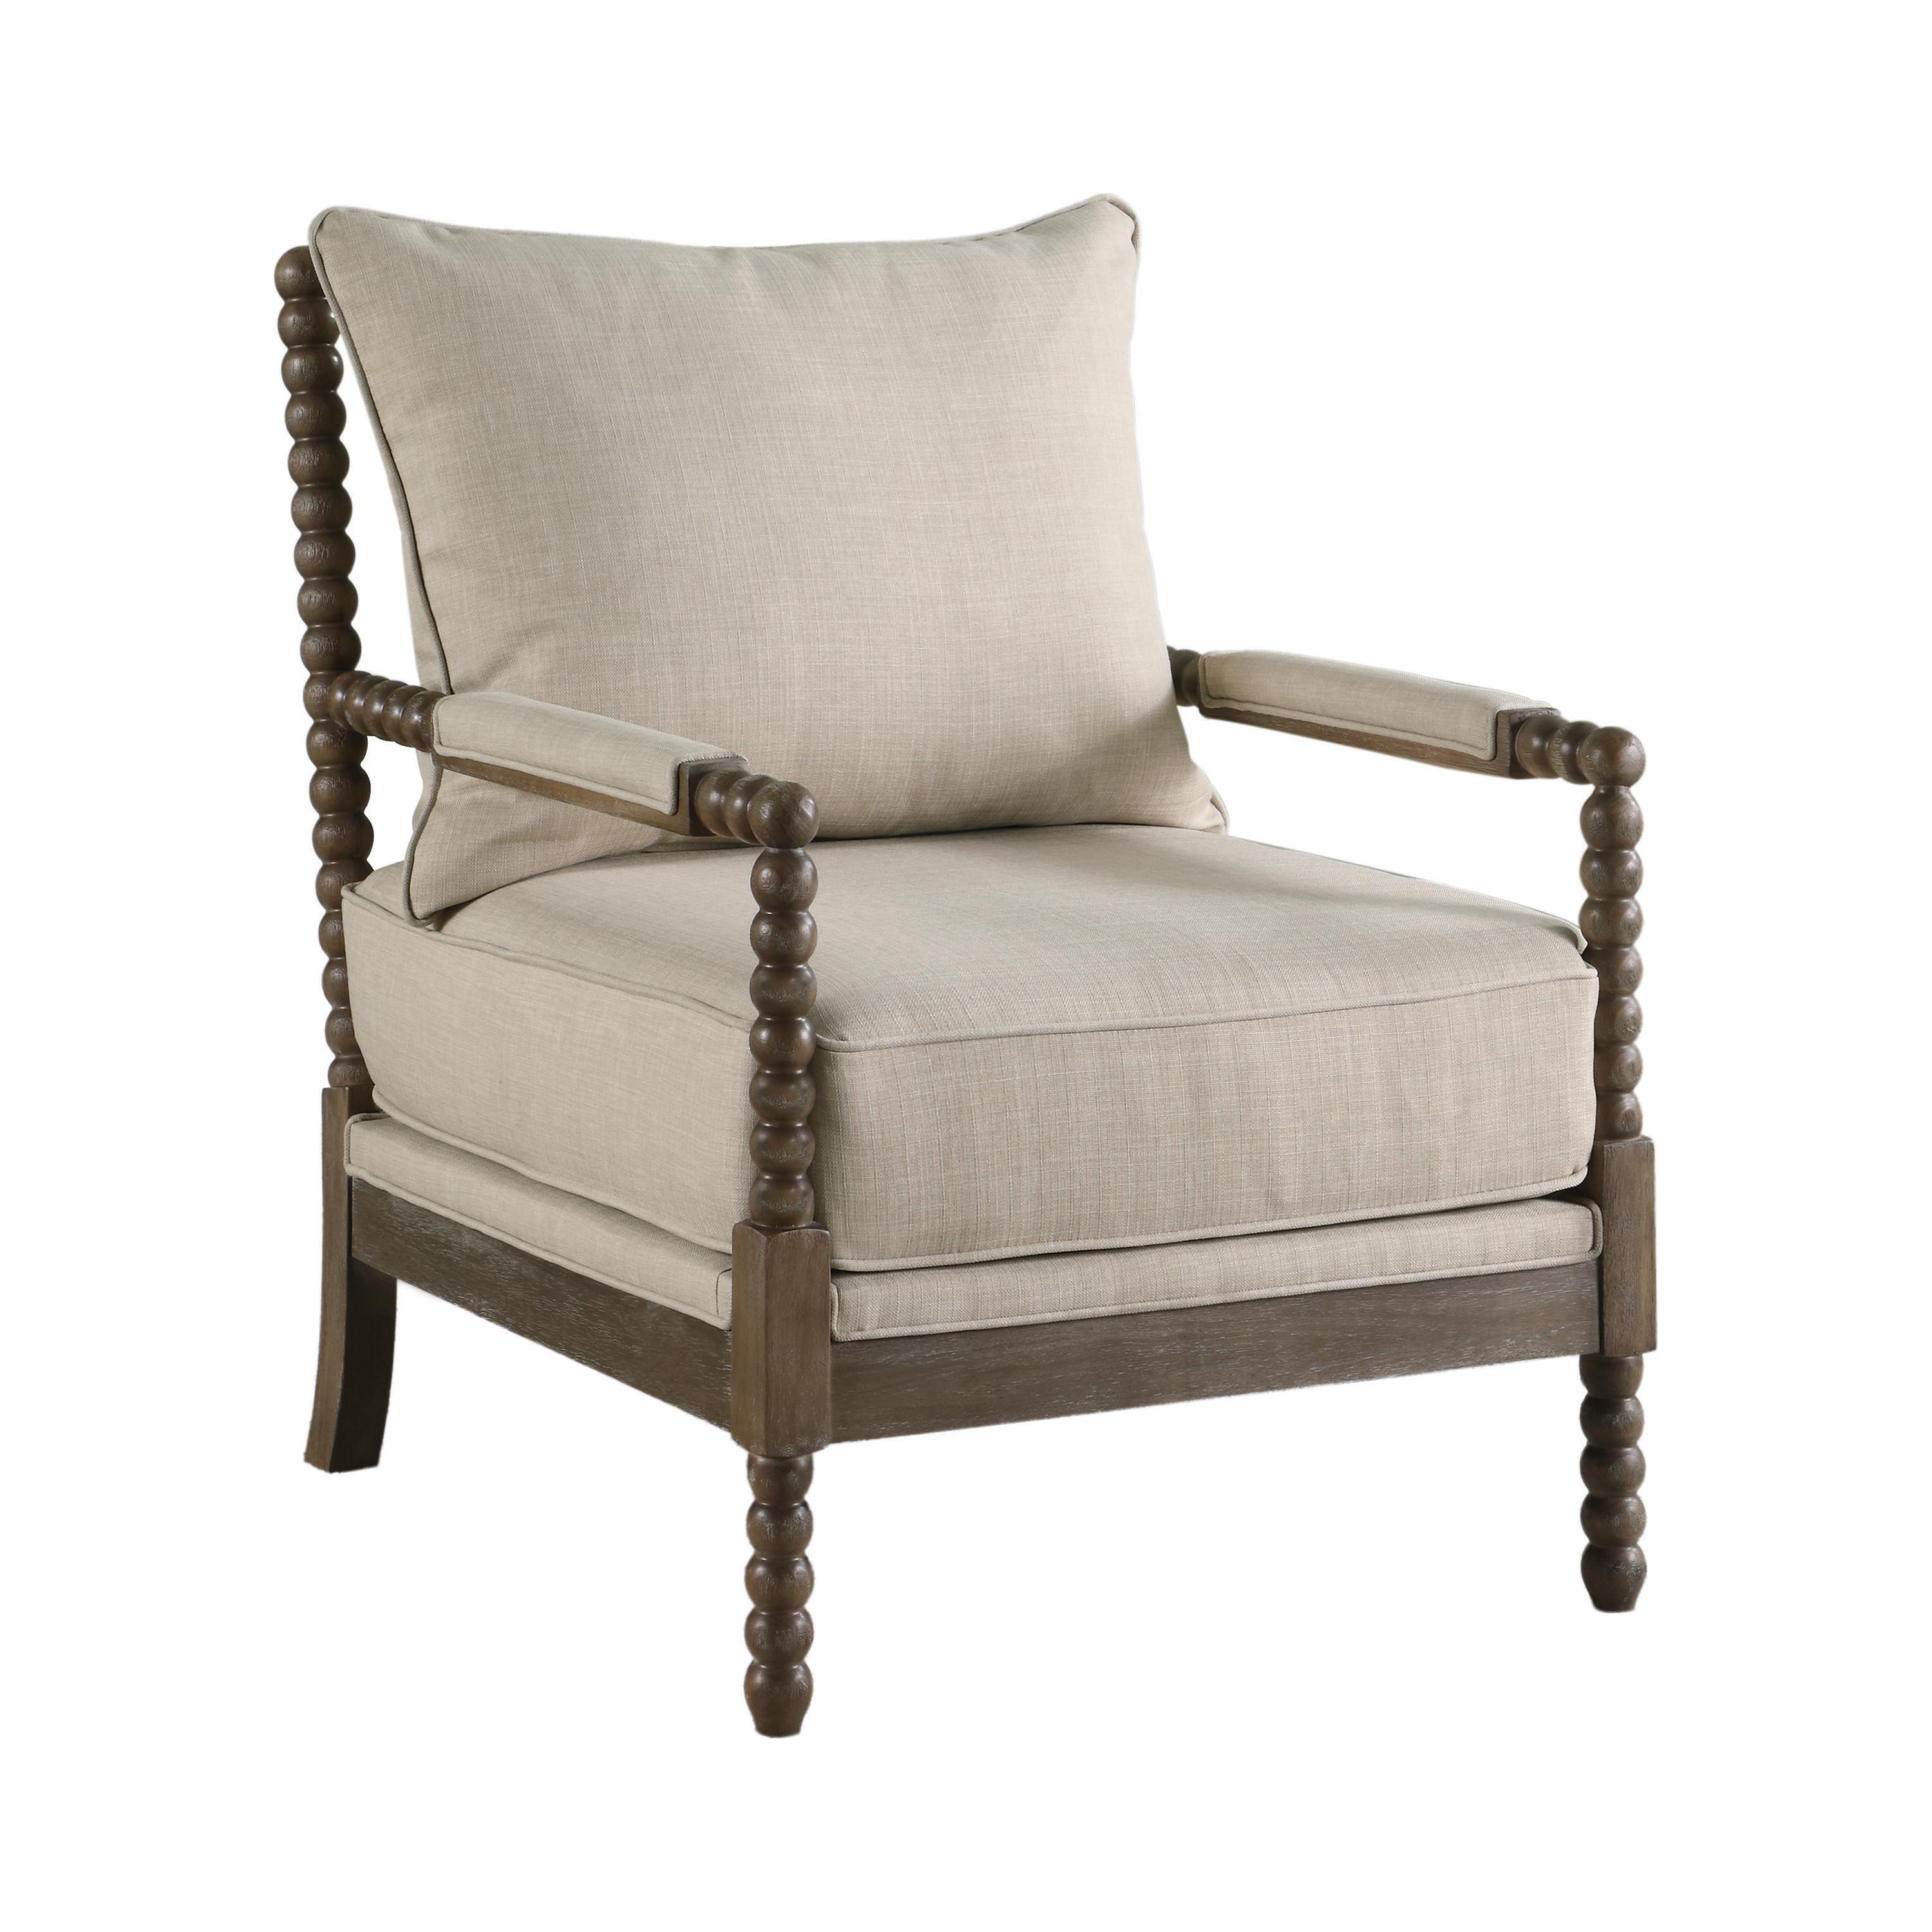 Transitional Accent Chair 905362 905362 in Oatmeal 